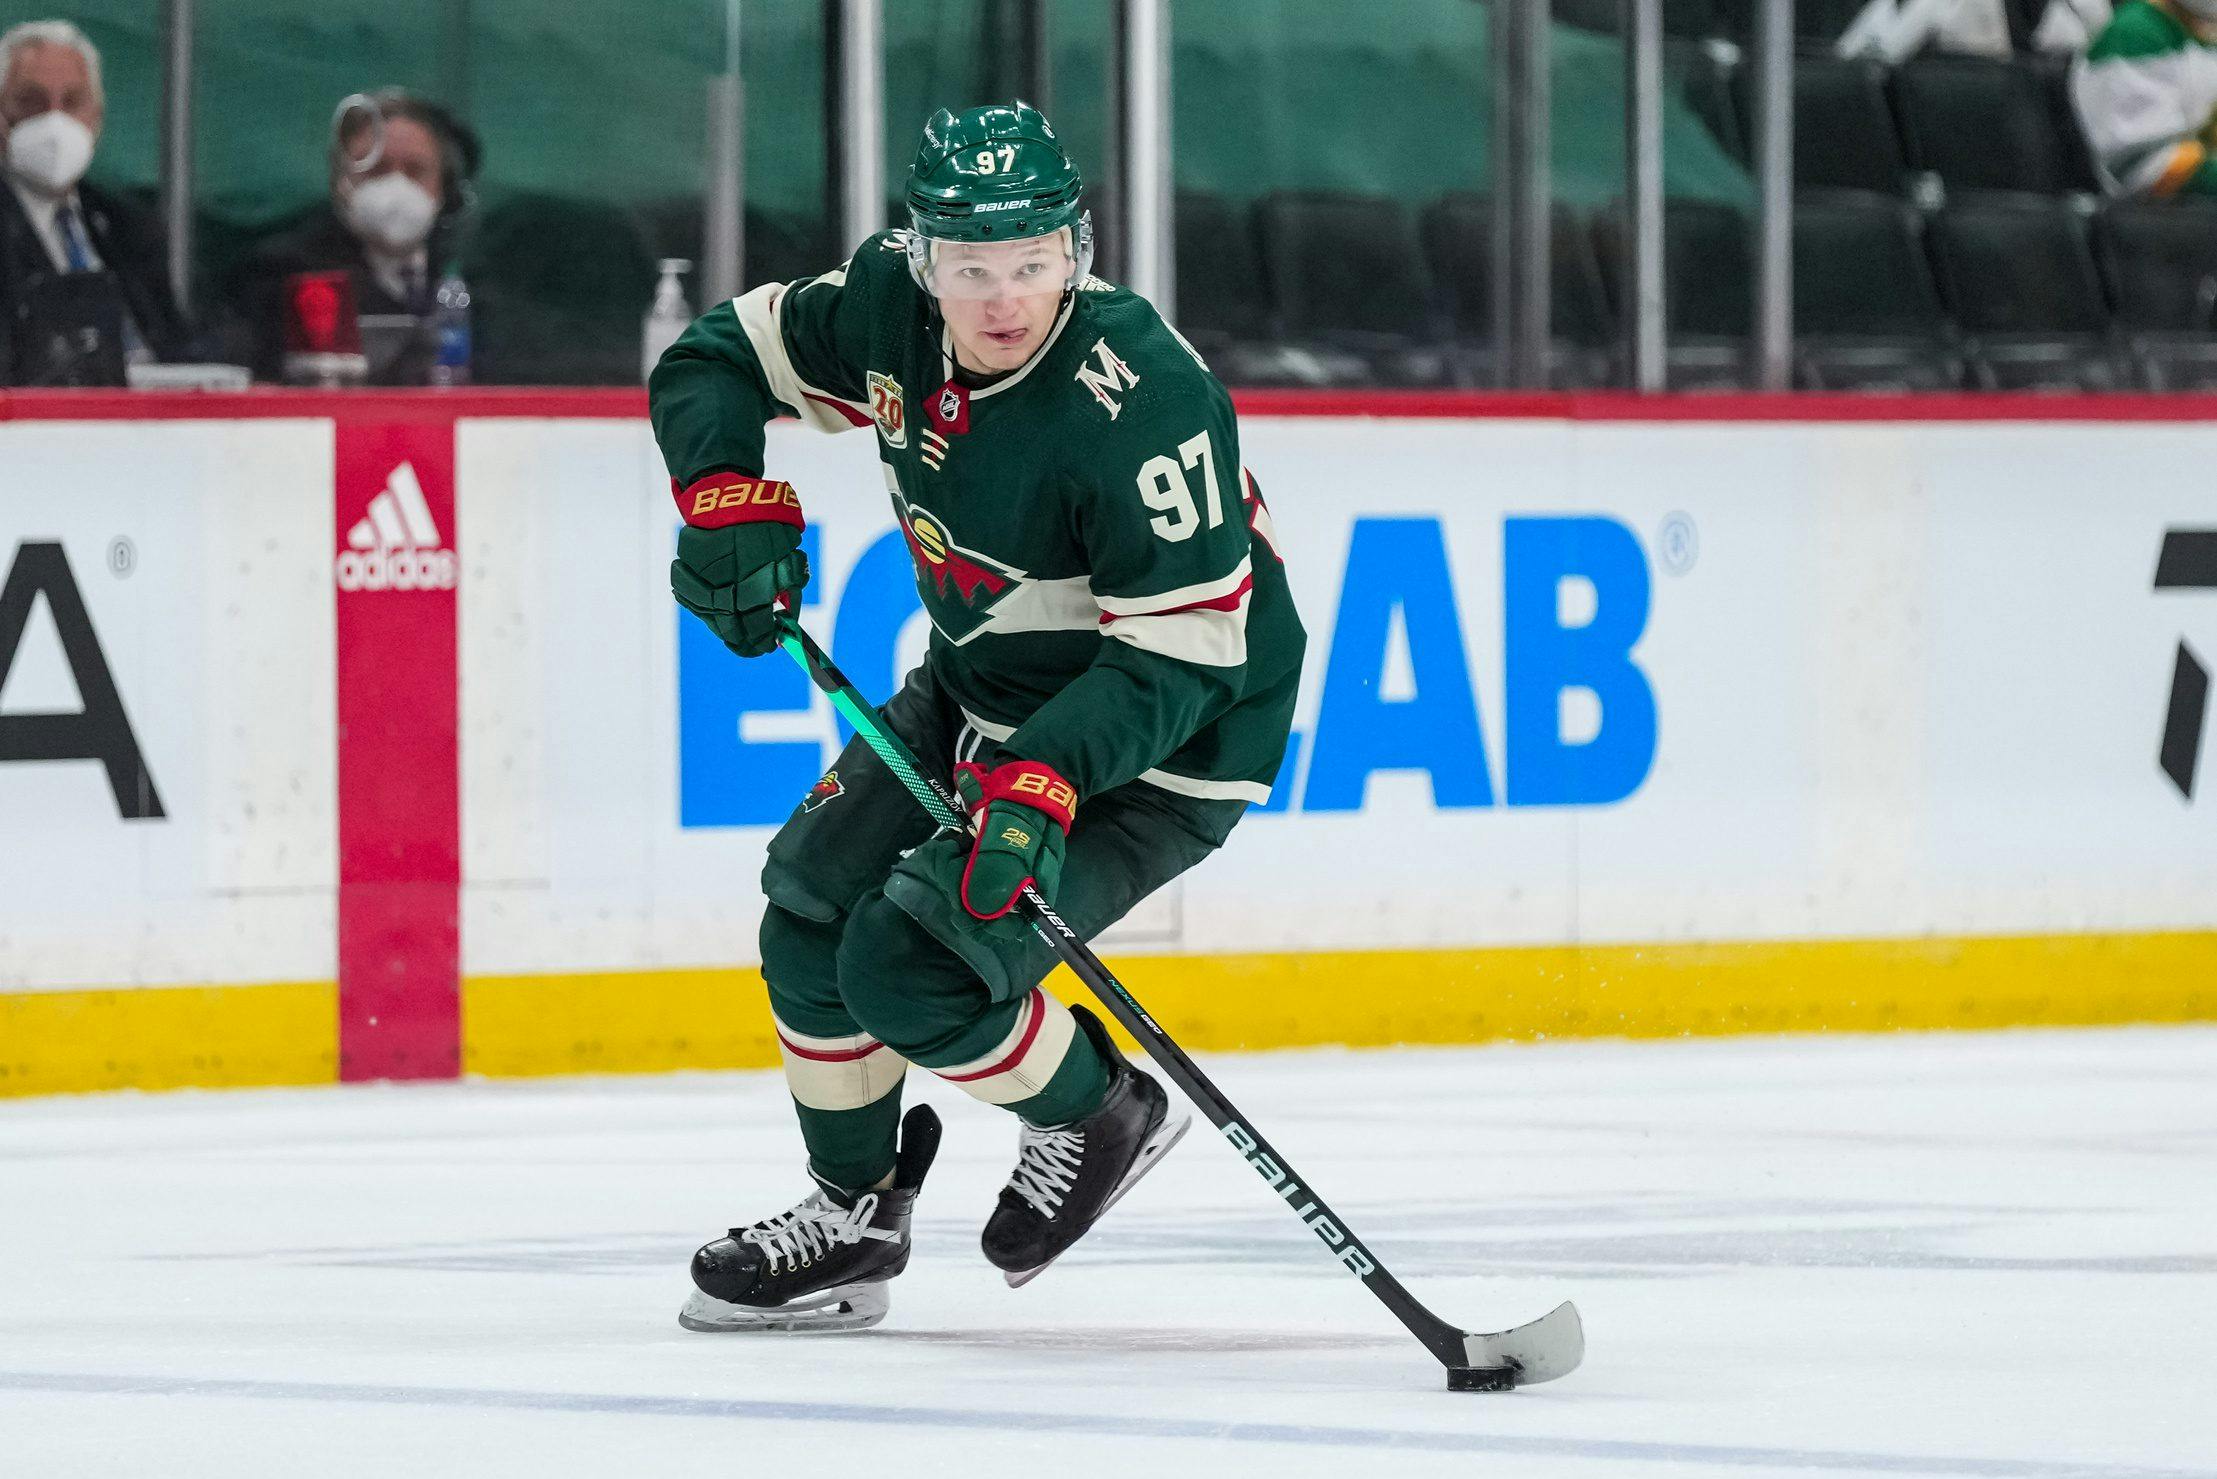 Kirill Kaprizov and the Wild have agreed on a five-year contract